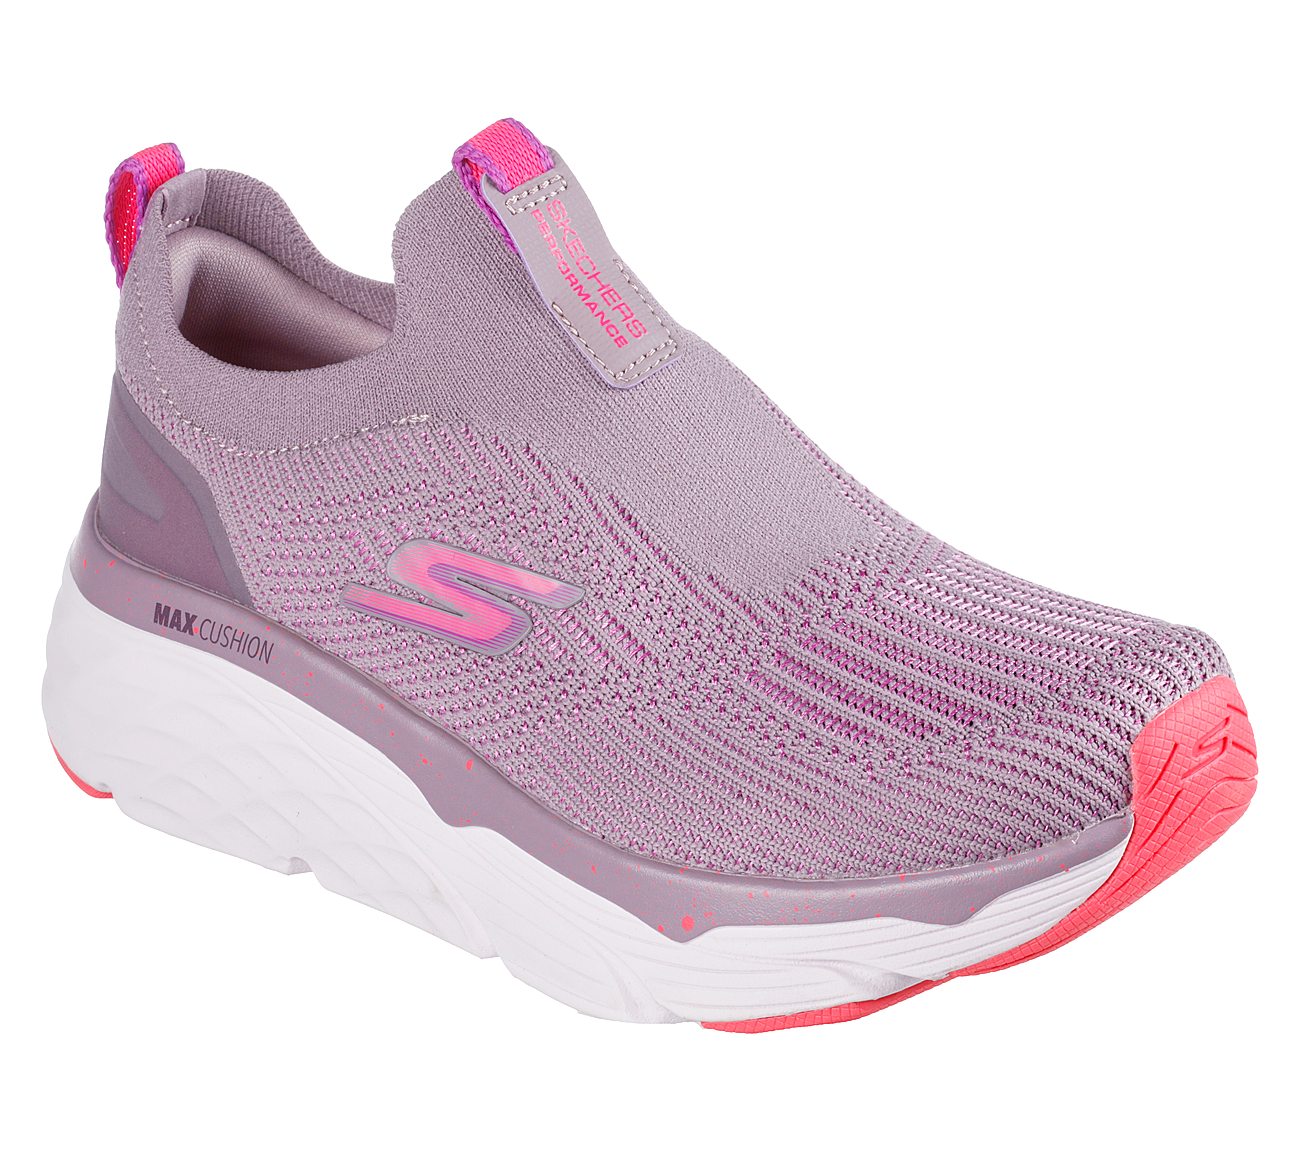 MAX CUSHIONING ELITE-PROMISED, LAVENDER/PINK Footwear Right View